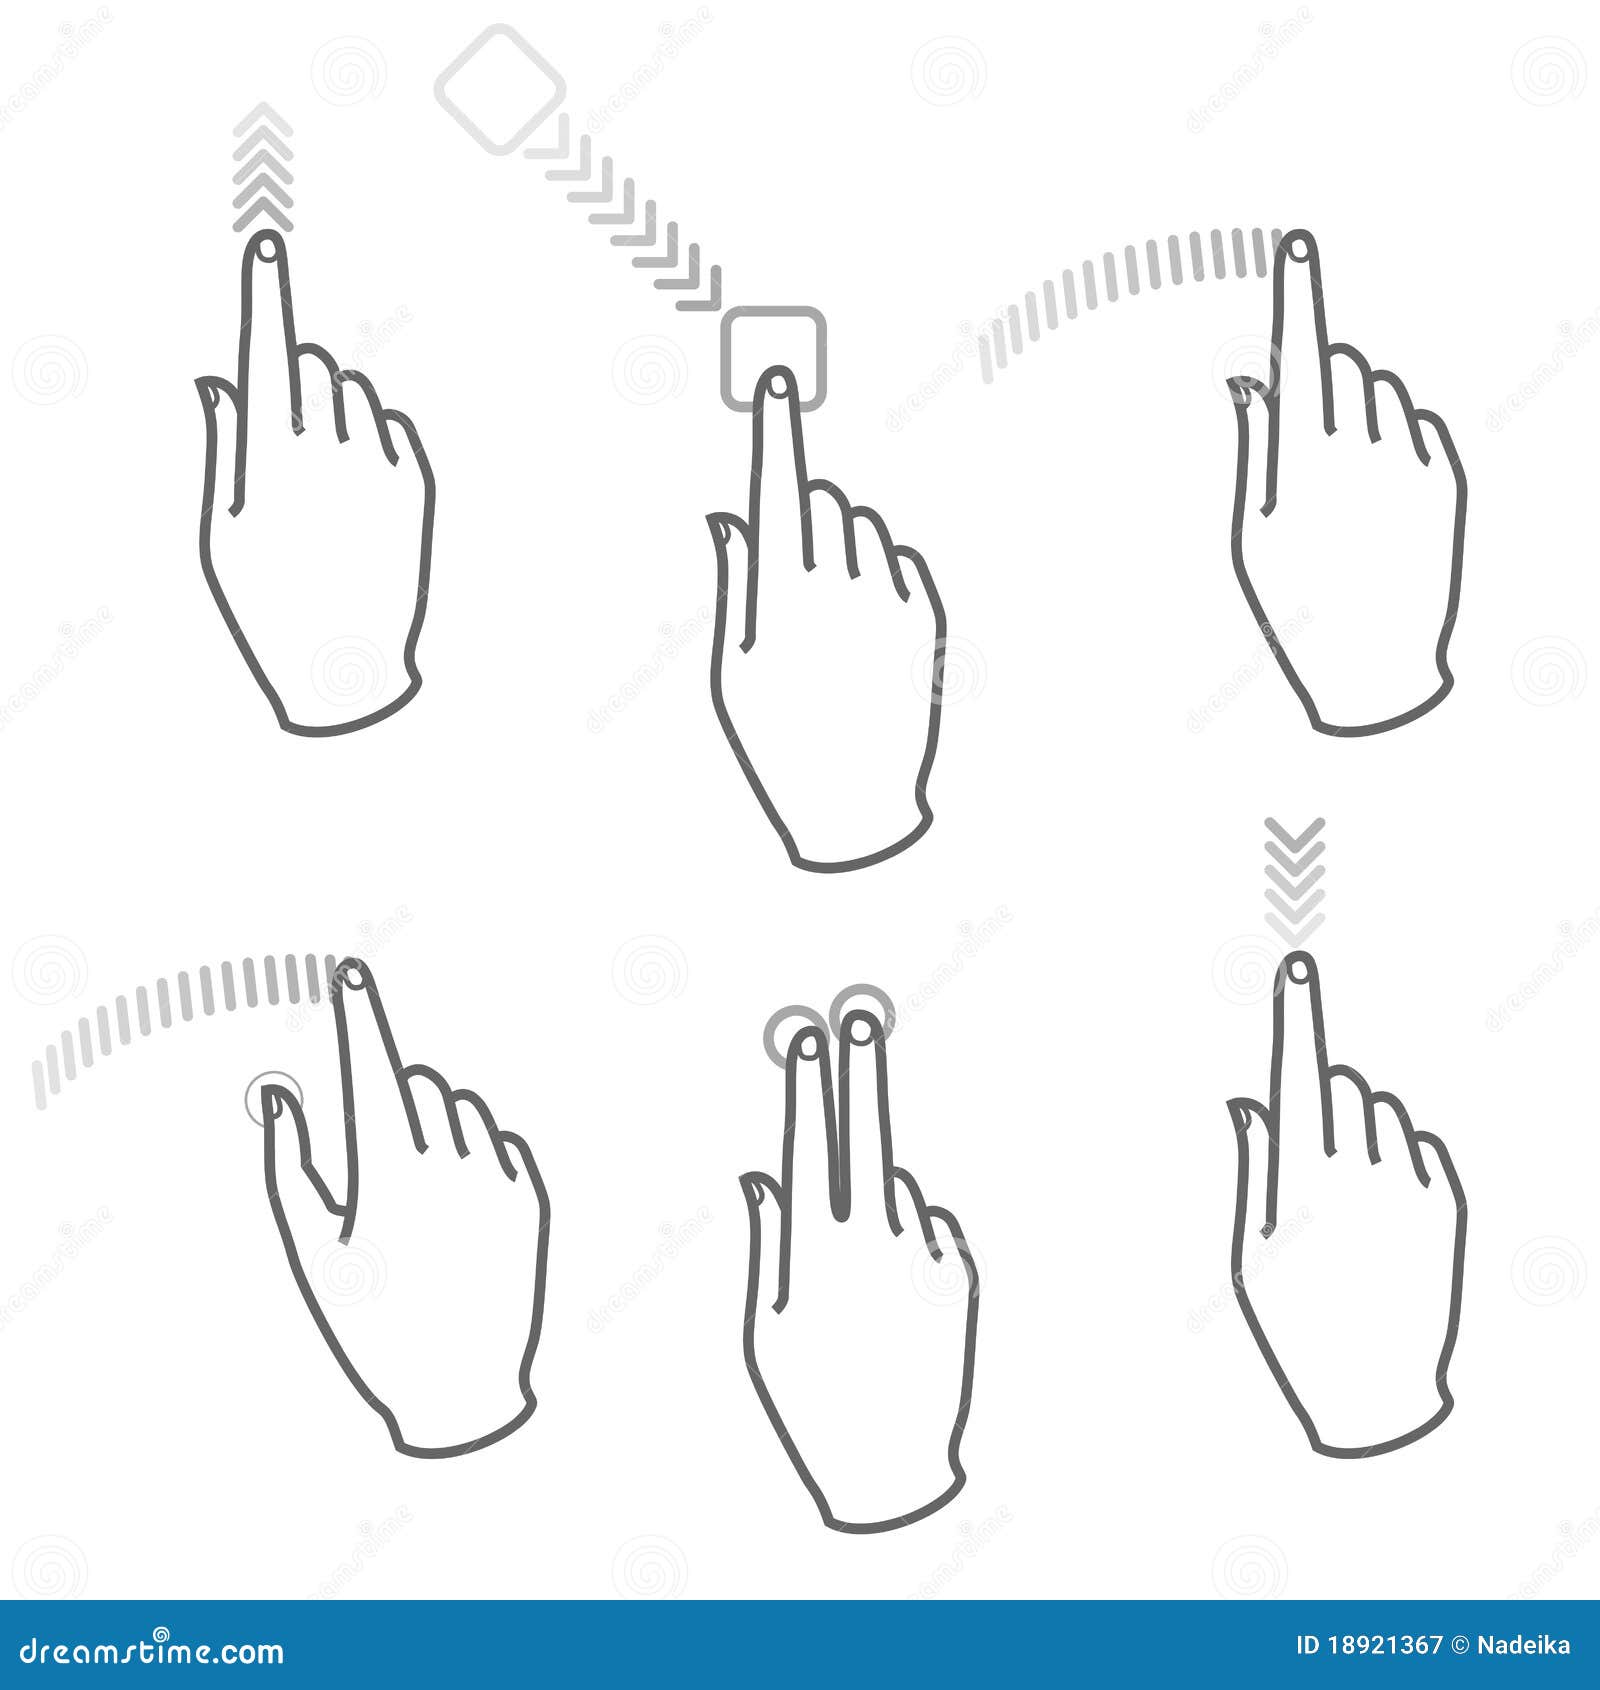 touch-screen-gesture-hand-4